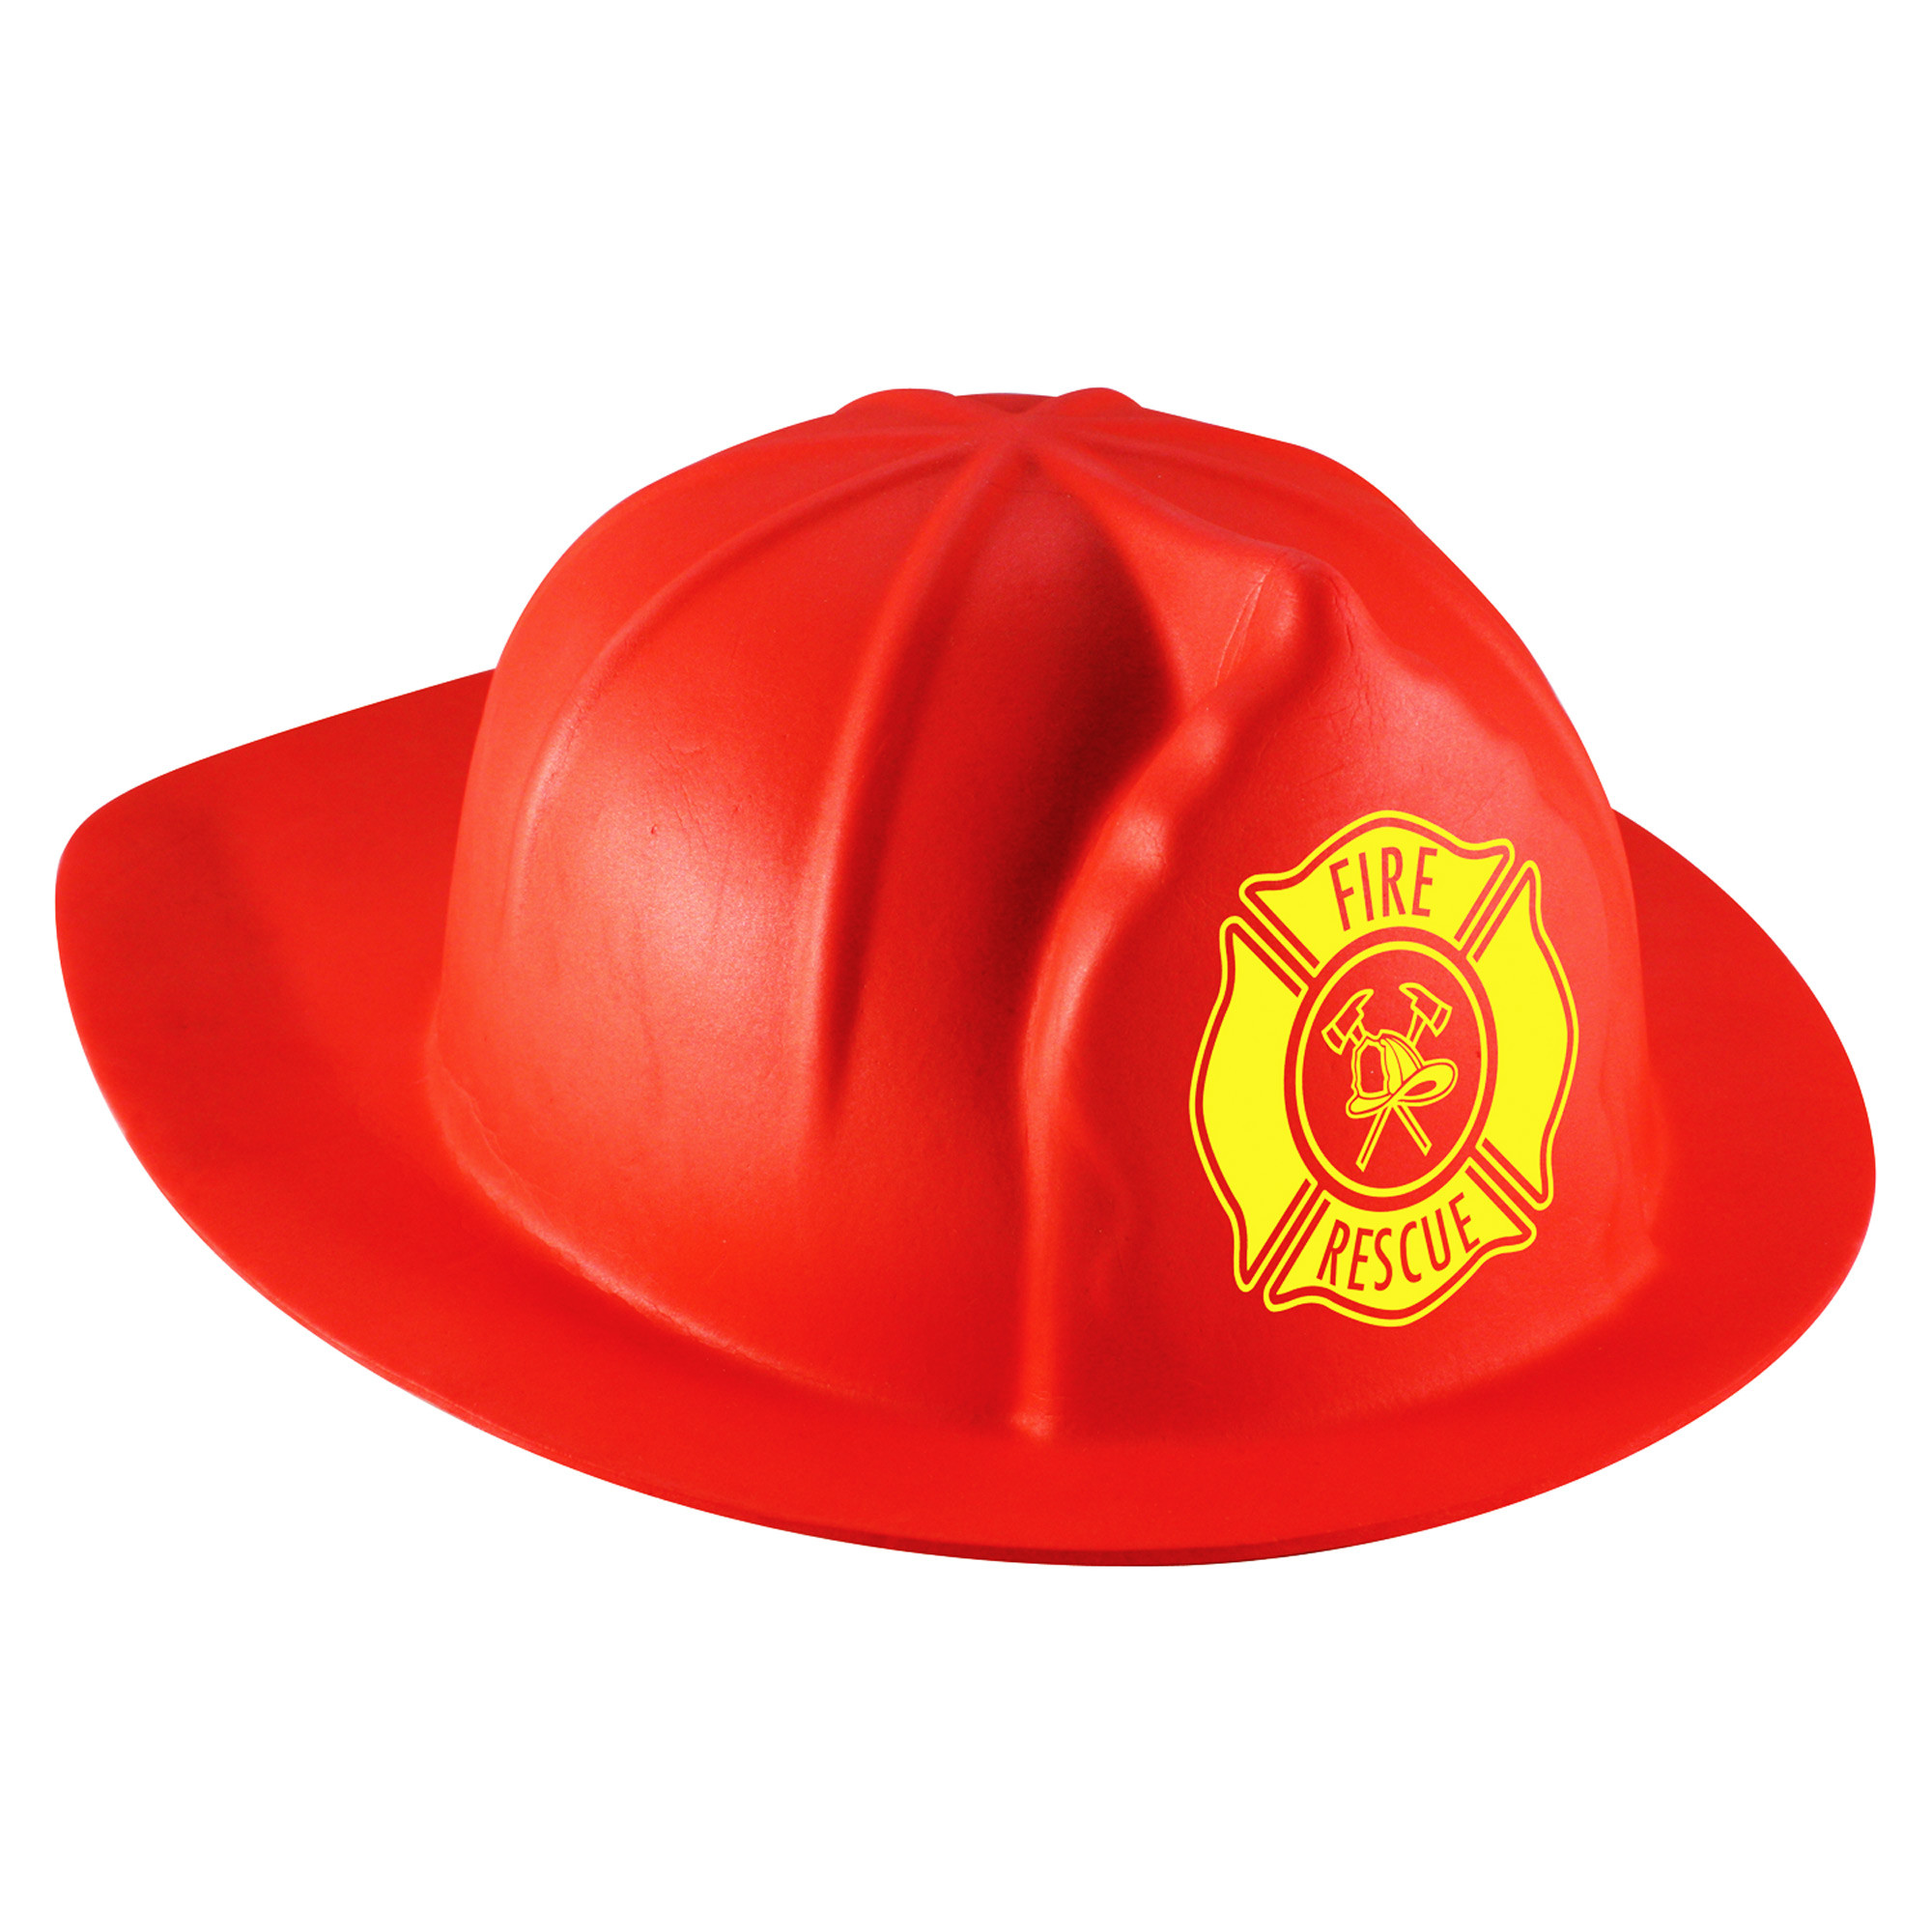 firefighter hat clipart - photo #16